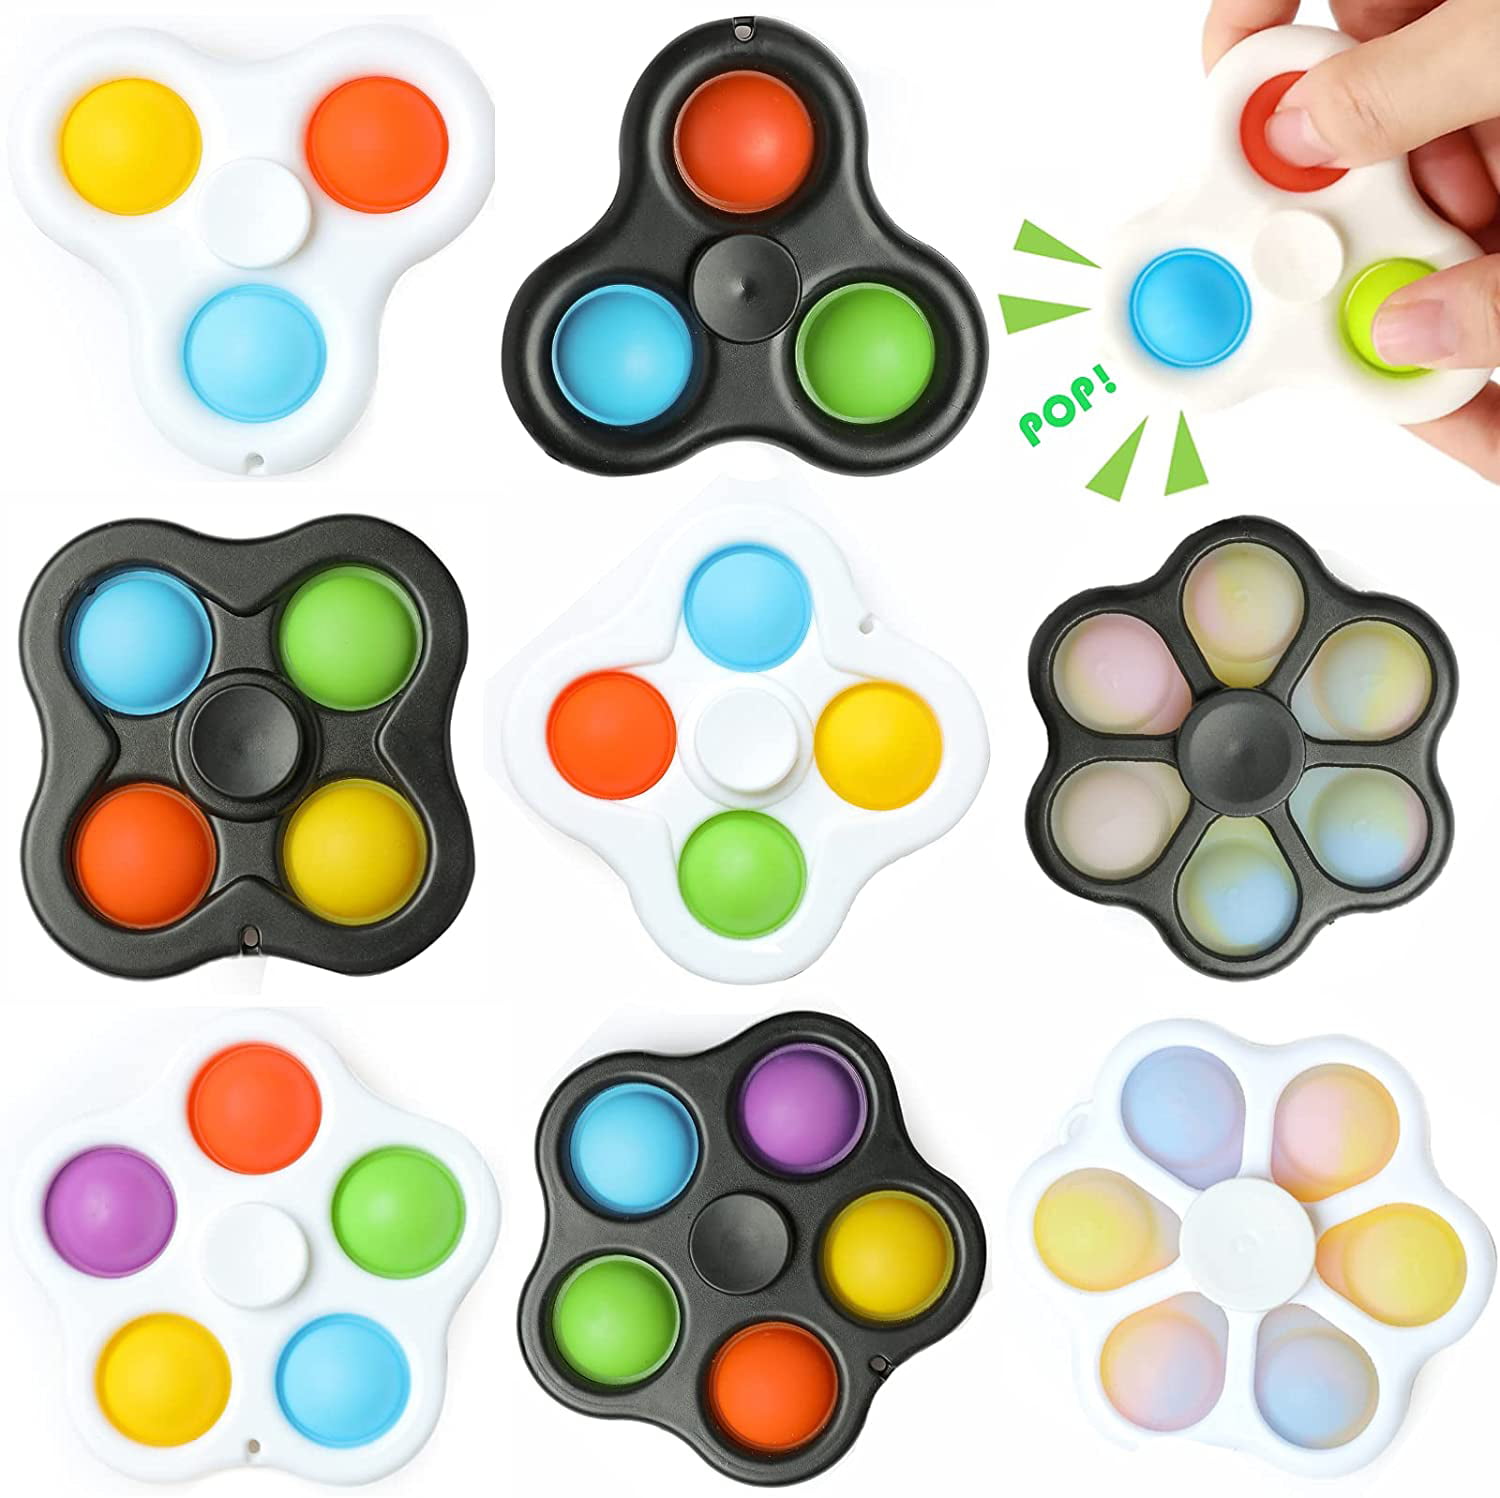 Autism ADHD Stress Fidget Toys Stress Relief Hand Spinners Finger Relax Toys  # 